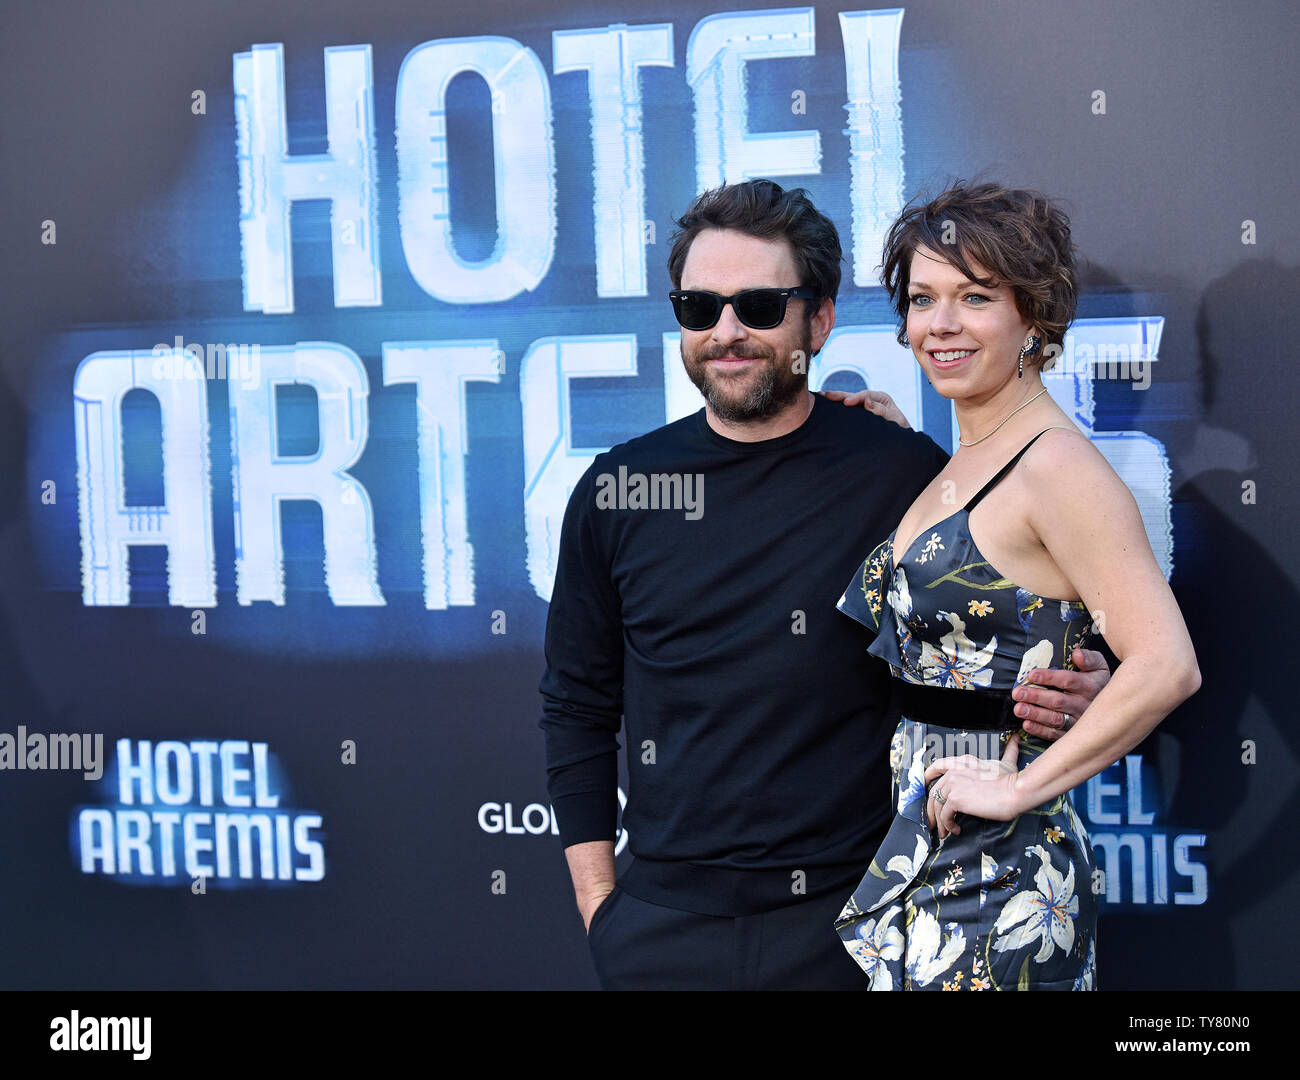 Charlie Day (L) and his wife Mary Elizabeth Ellis attend the premiere of  'Hotel Artemis' at the Regency Bruin Theatre in Los Angeles, California on  May 19, 2018. Photo by Chris Chew/UPI